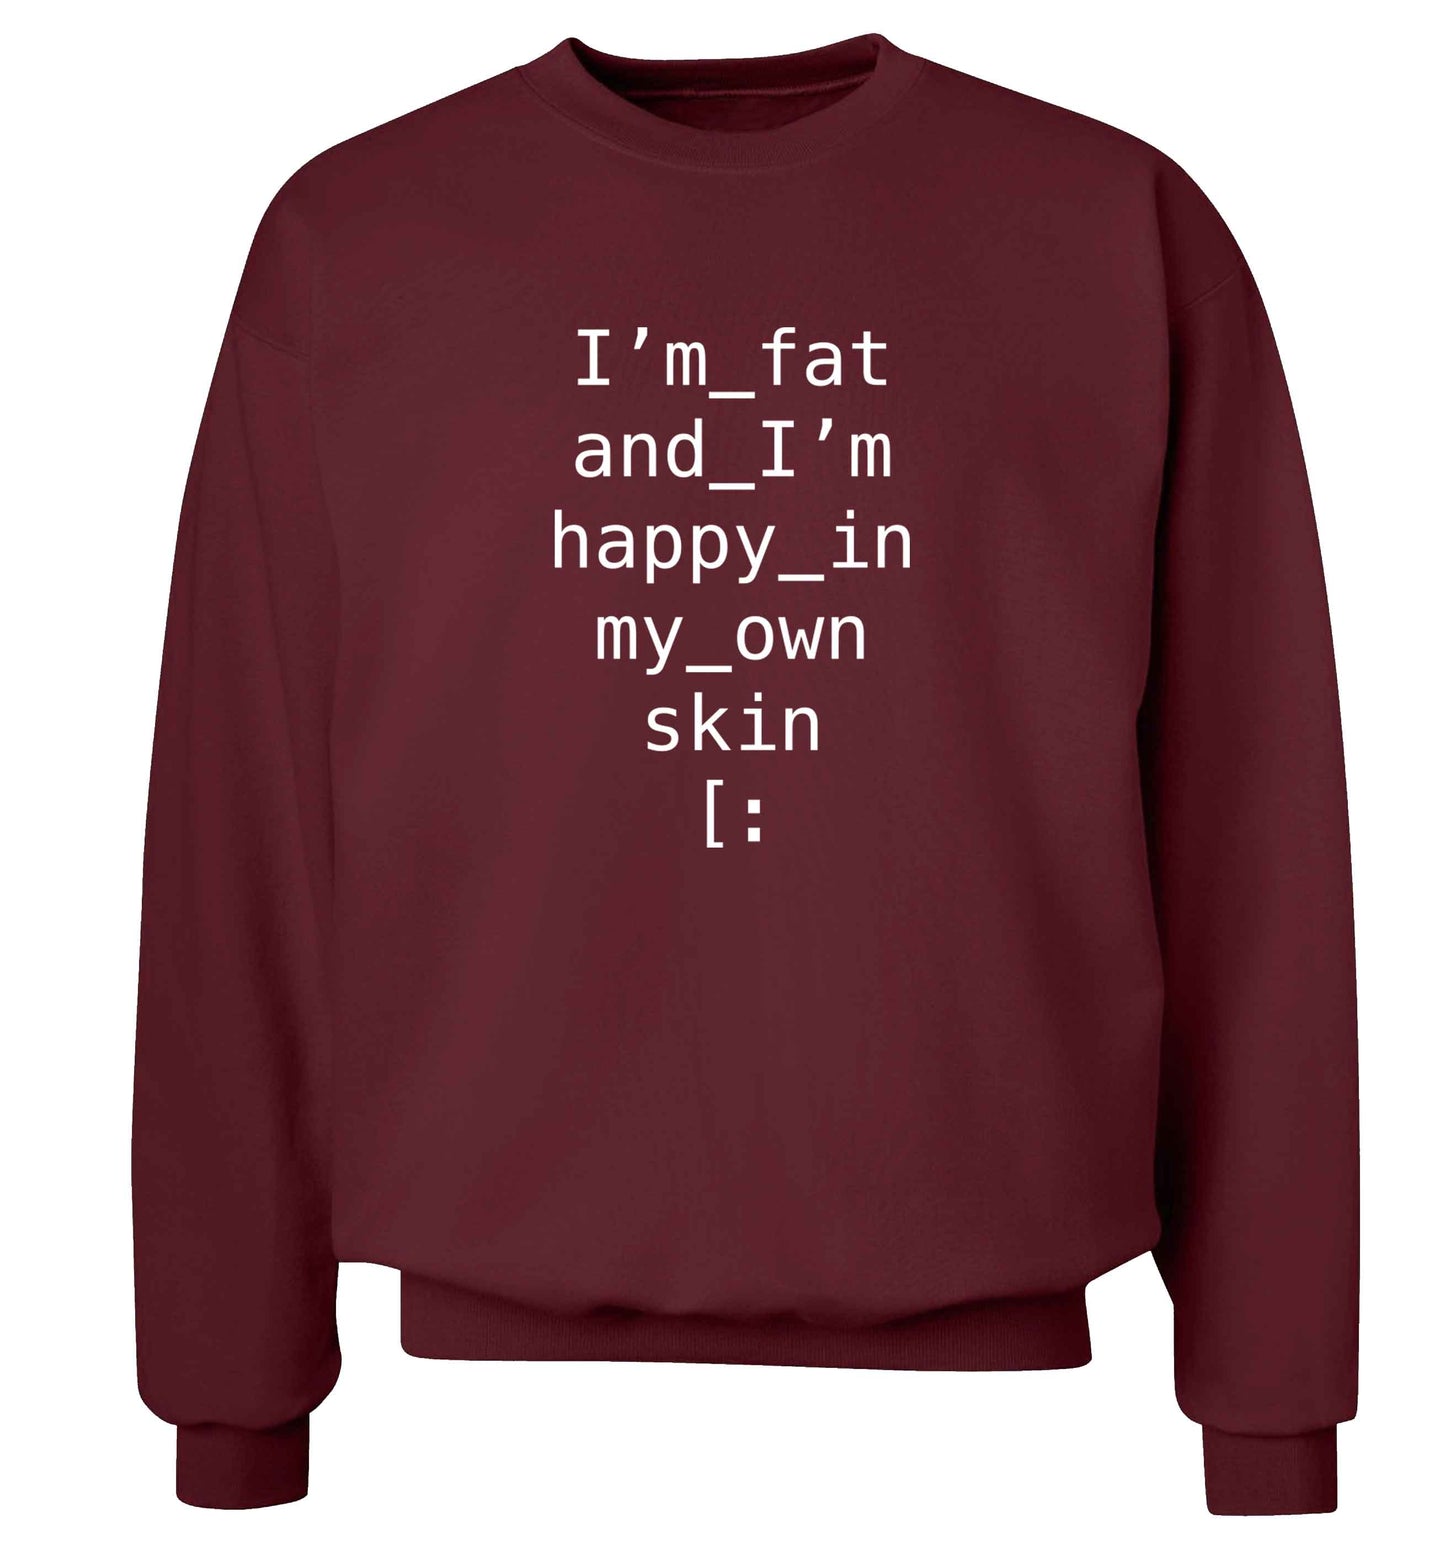 I'm fat and happy in my own skin adult's unisex maroon sweater 2XL